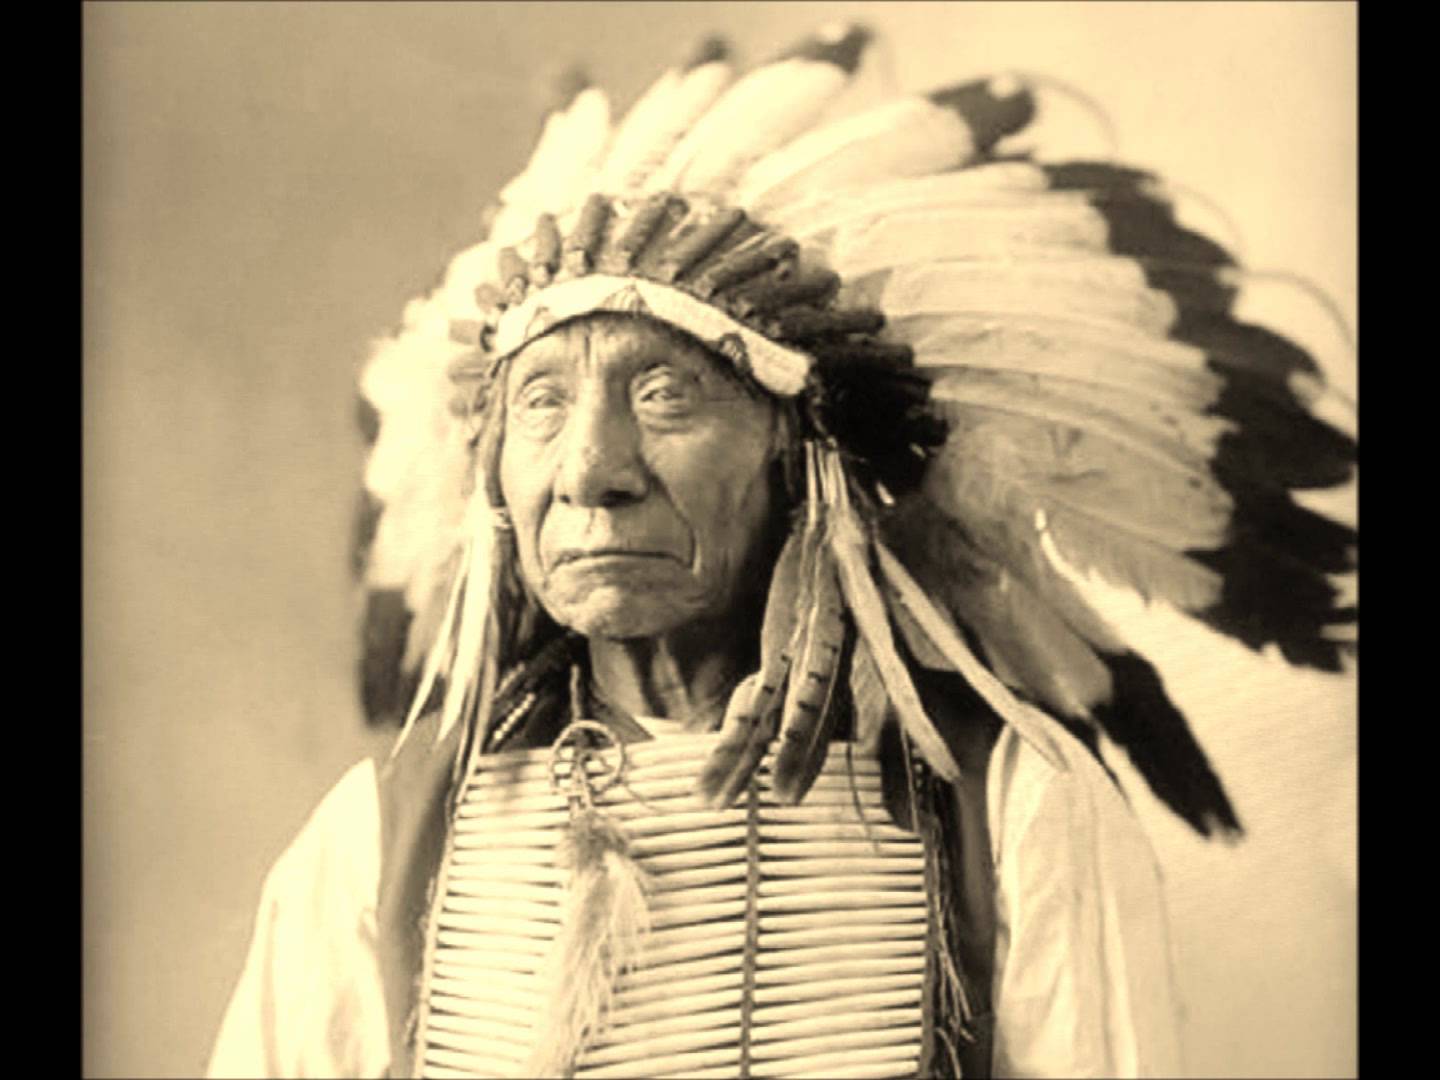 Red Cloud Yellow Logo - June 1870: Chief Red Cloud meets with Ulysses S. Grant